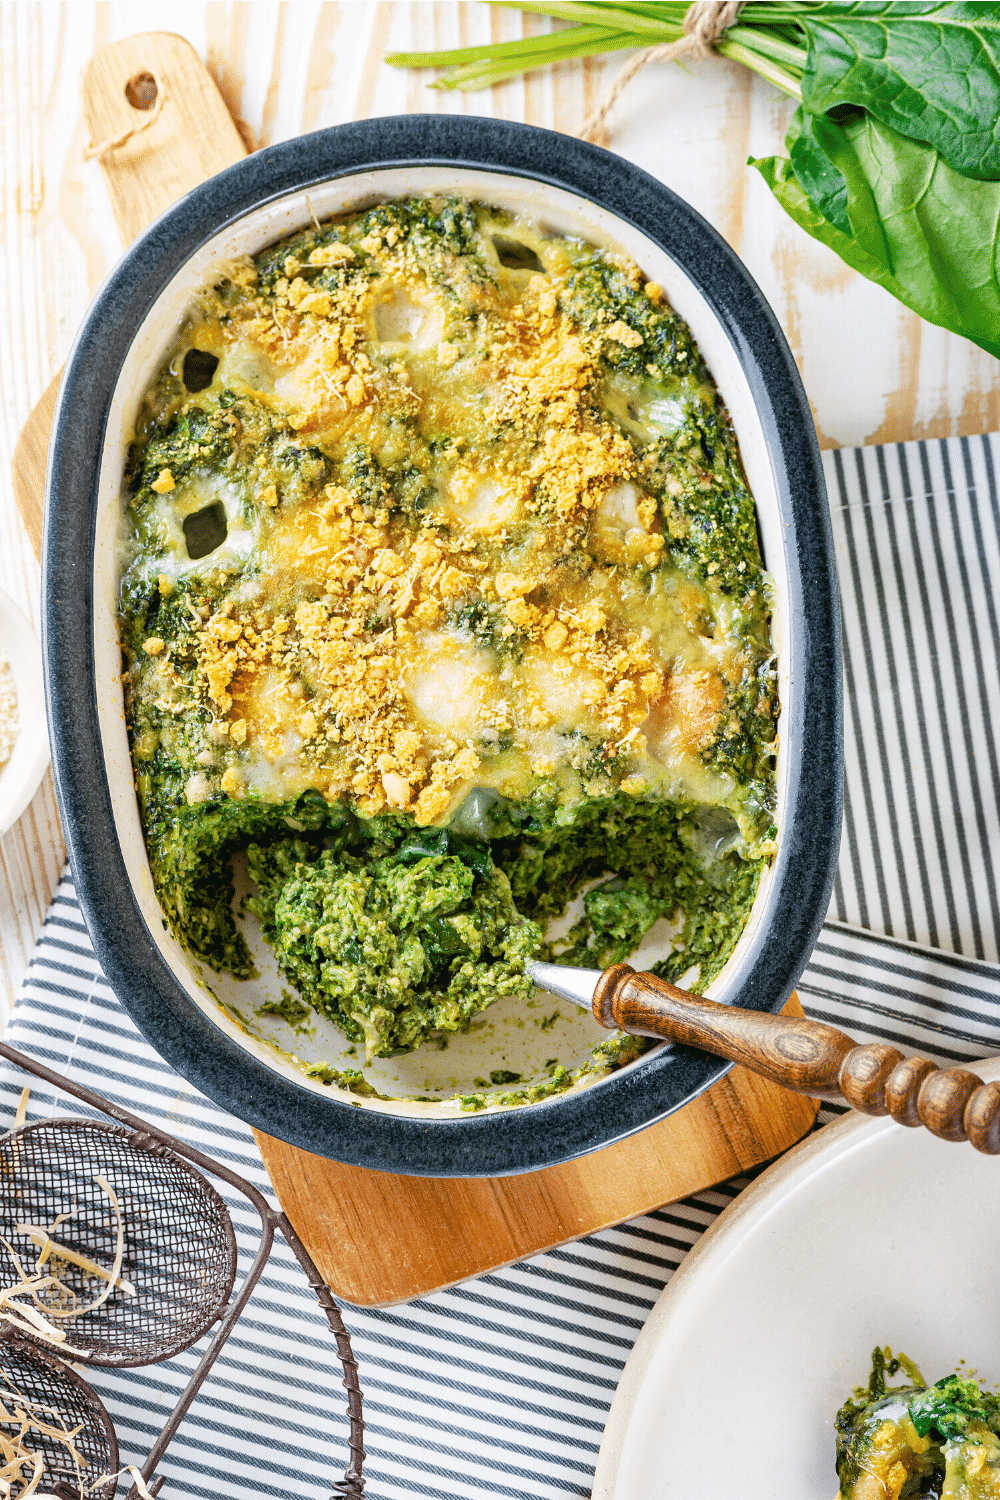 A baking dish filled with spinach casserole. A spoon is scooping up some of the spinach casserole. The baking dish of spinach casserole is on a wooden cutting board on top of a white and blue tablecloth.